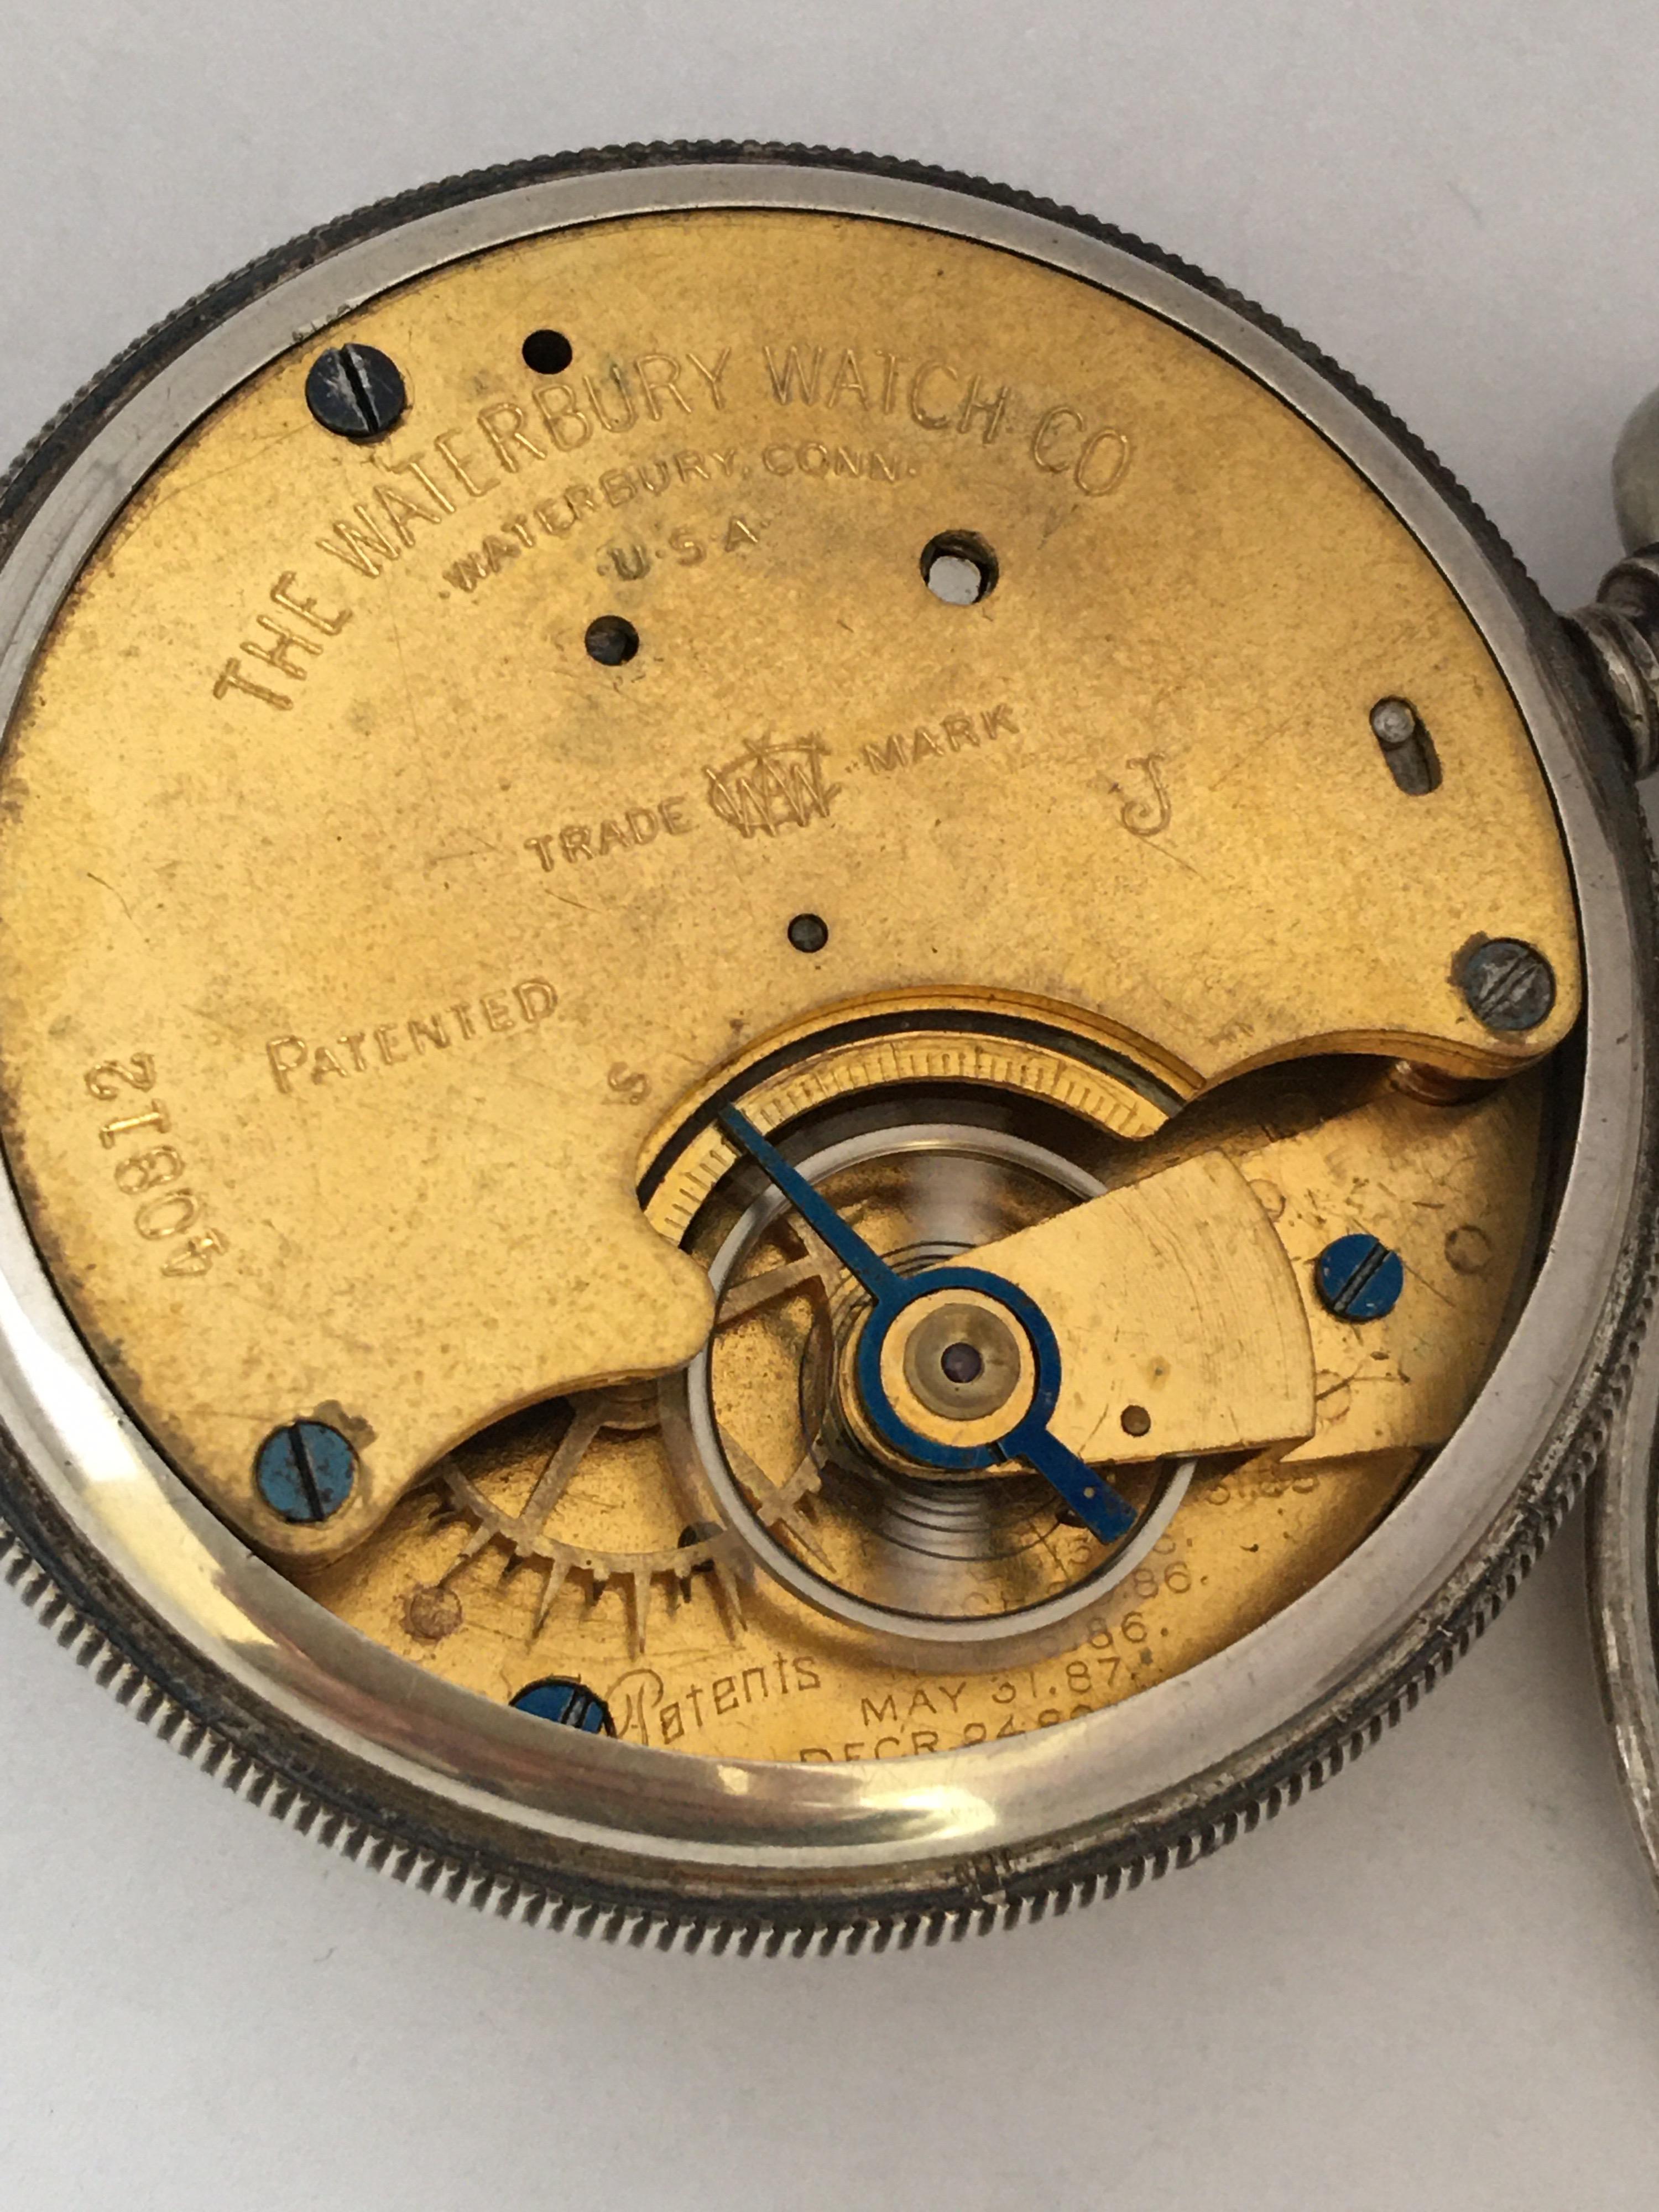 Antique Silver Pocket watch Signed The Waterbury Watch Co. In Good Condition For Sale In Carlisle, GB